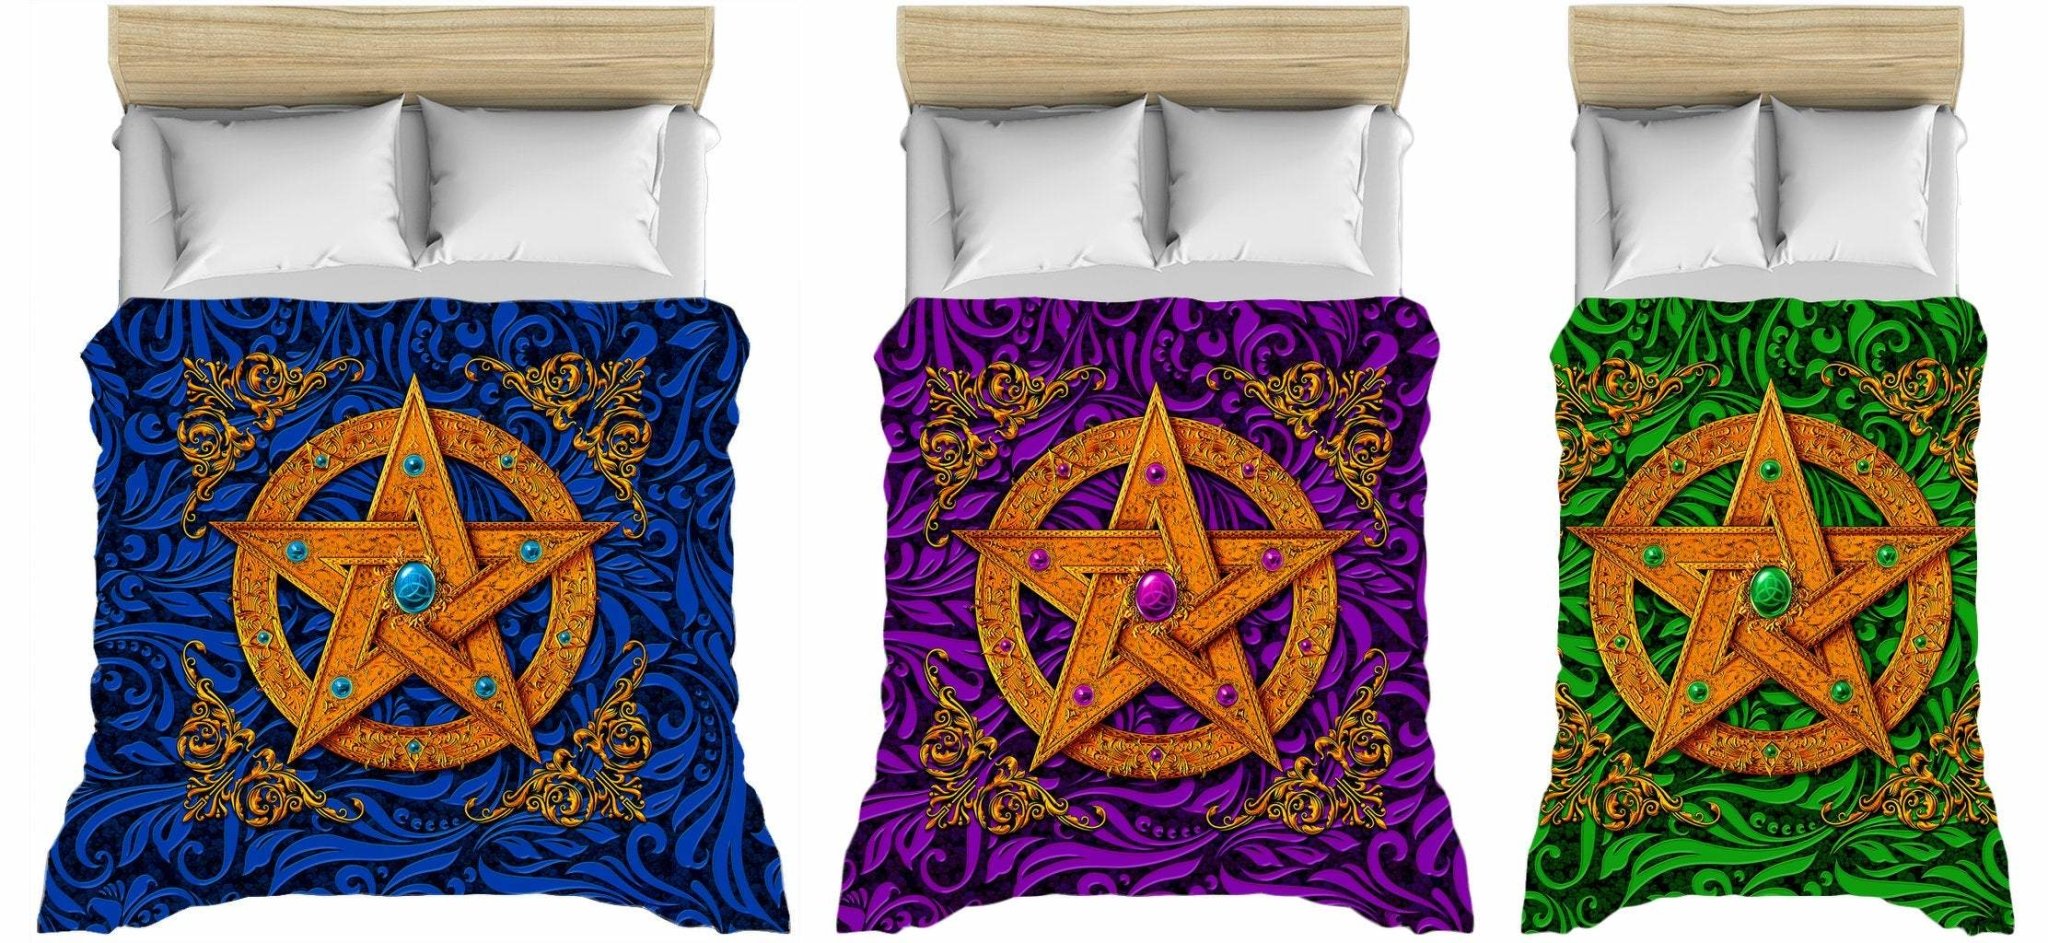 Pentacle Bedding Set, Comforter and Duvet, Wiccan Bed Cover and Witchy Bedroom Decor, King, Queen and Twin Size - 4 Colors - Abysm Internal